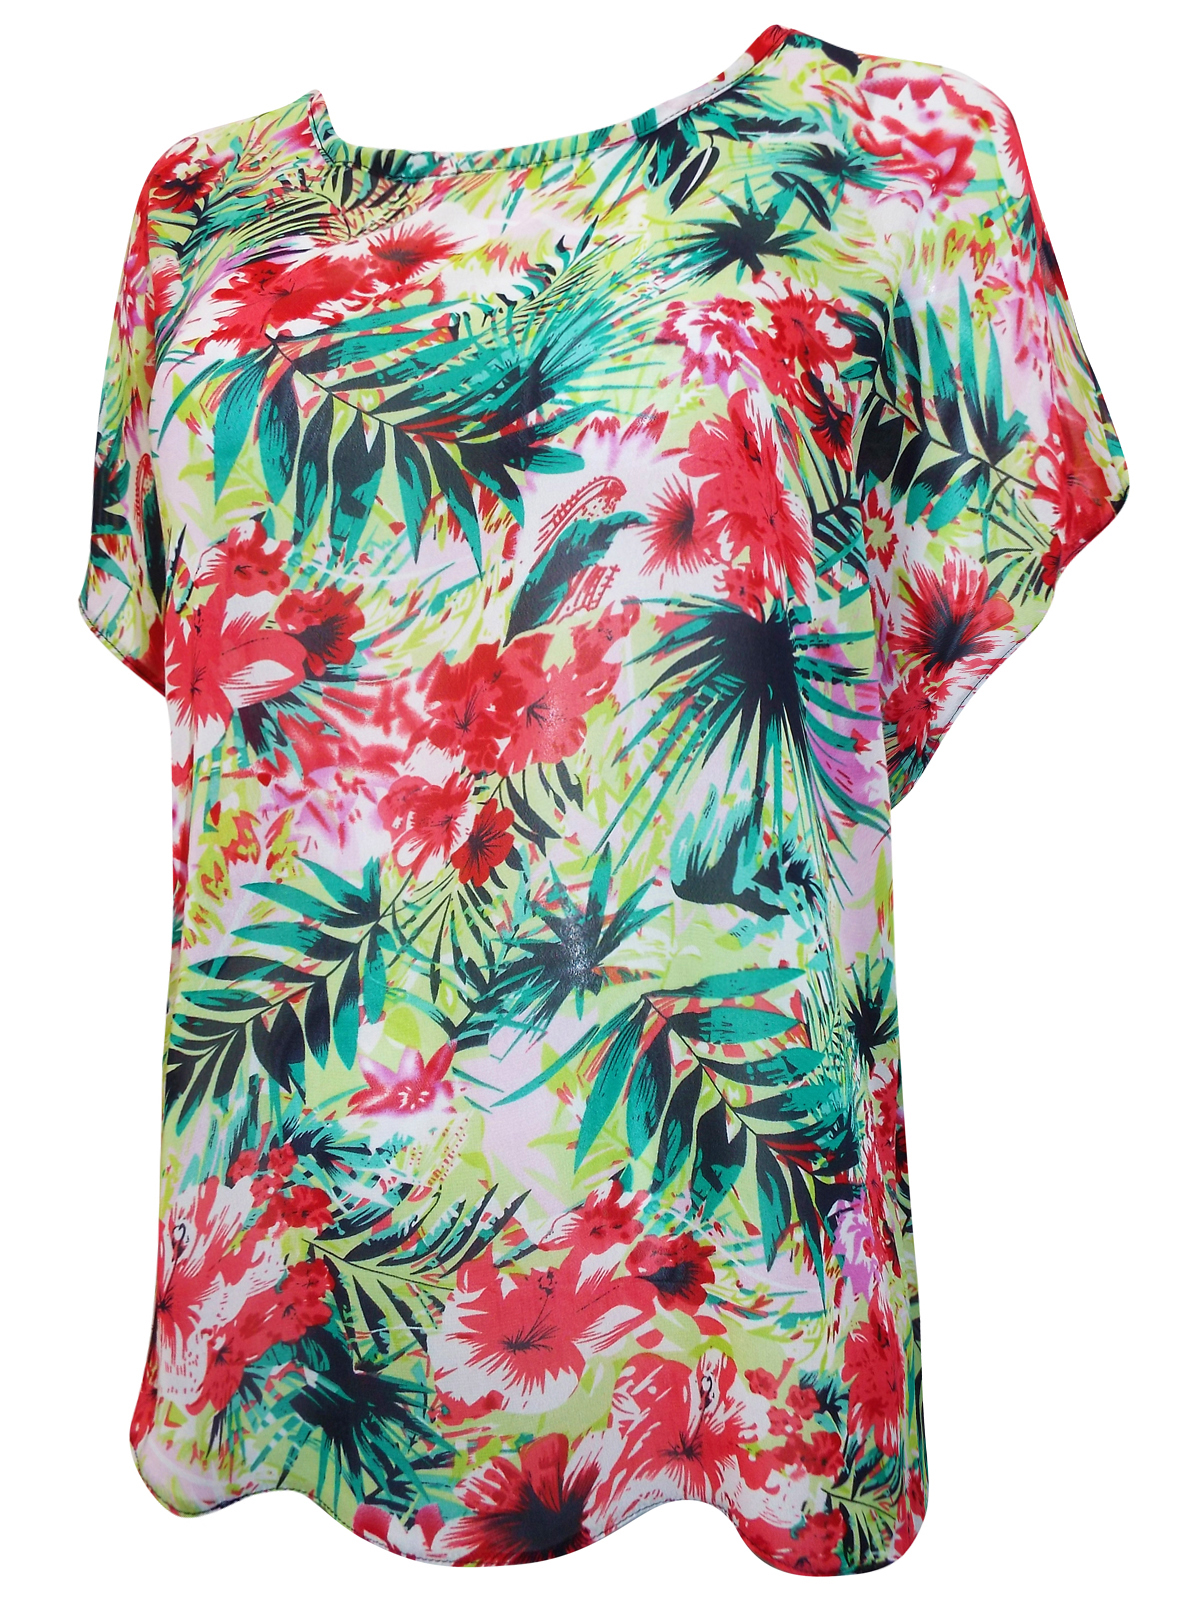 Zuri - - Zur LIME Hibiscus Printed Short Sleeve Top - Size Small to XLarge